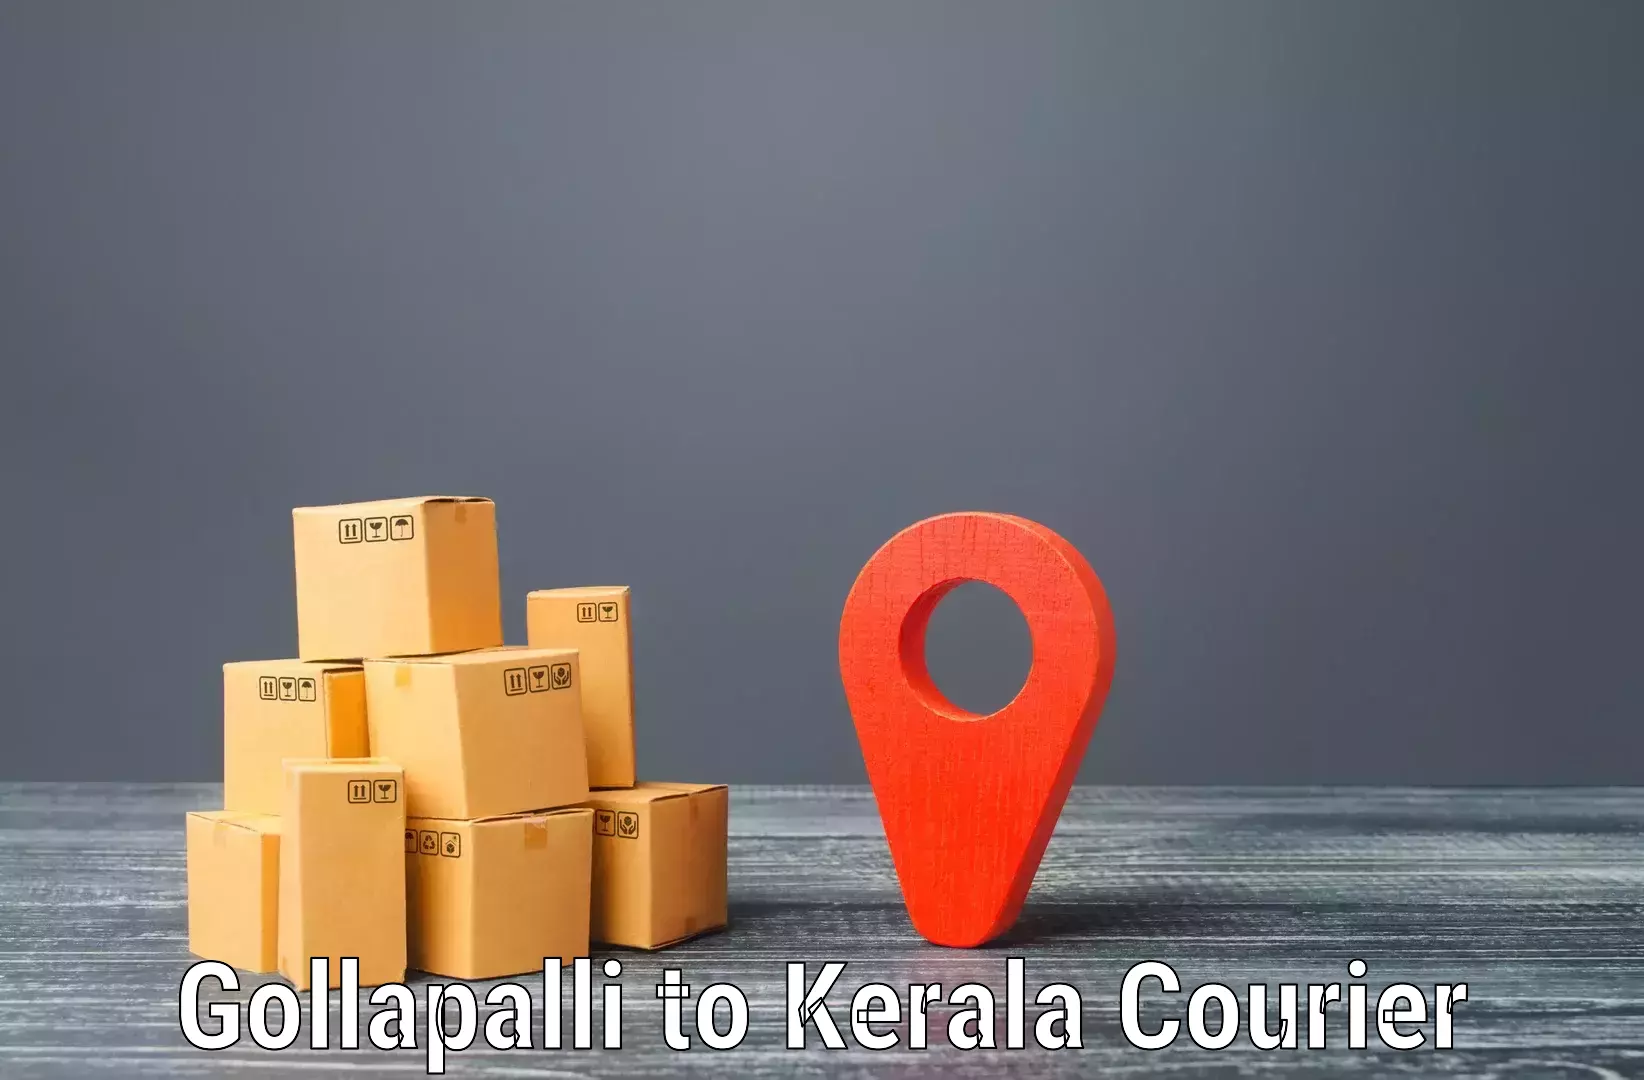 High-capacity shipping options in Gollapalli to Kodungallur